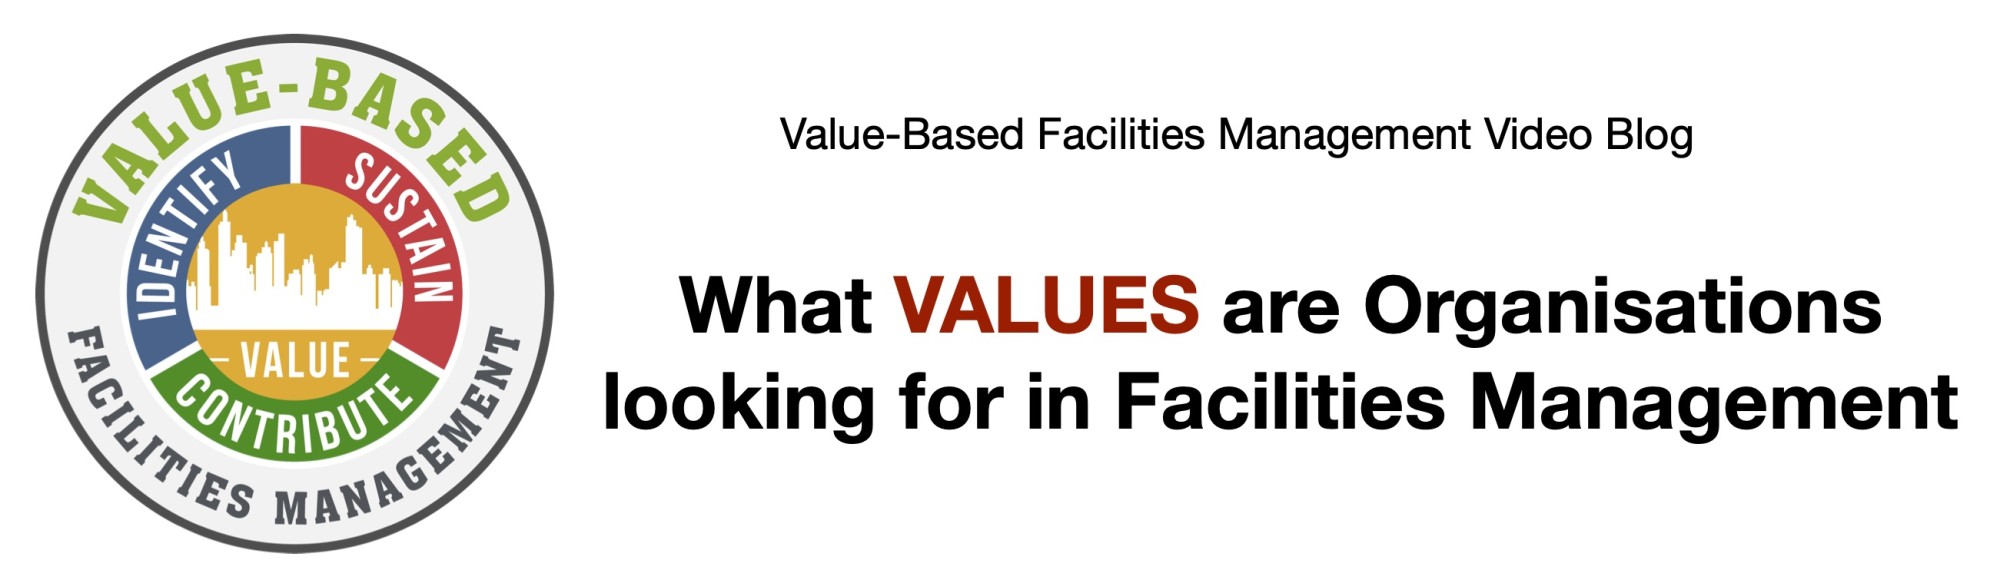 Value-based Facilities Management